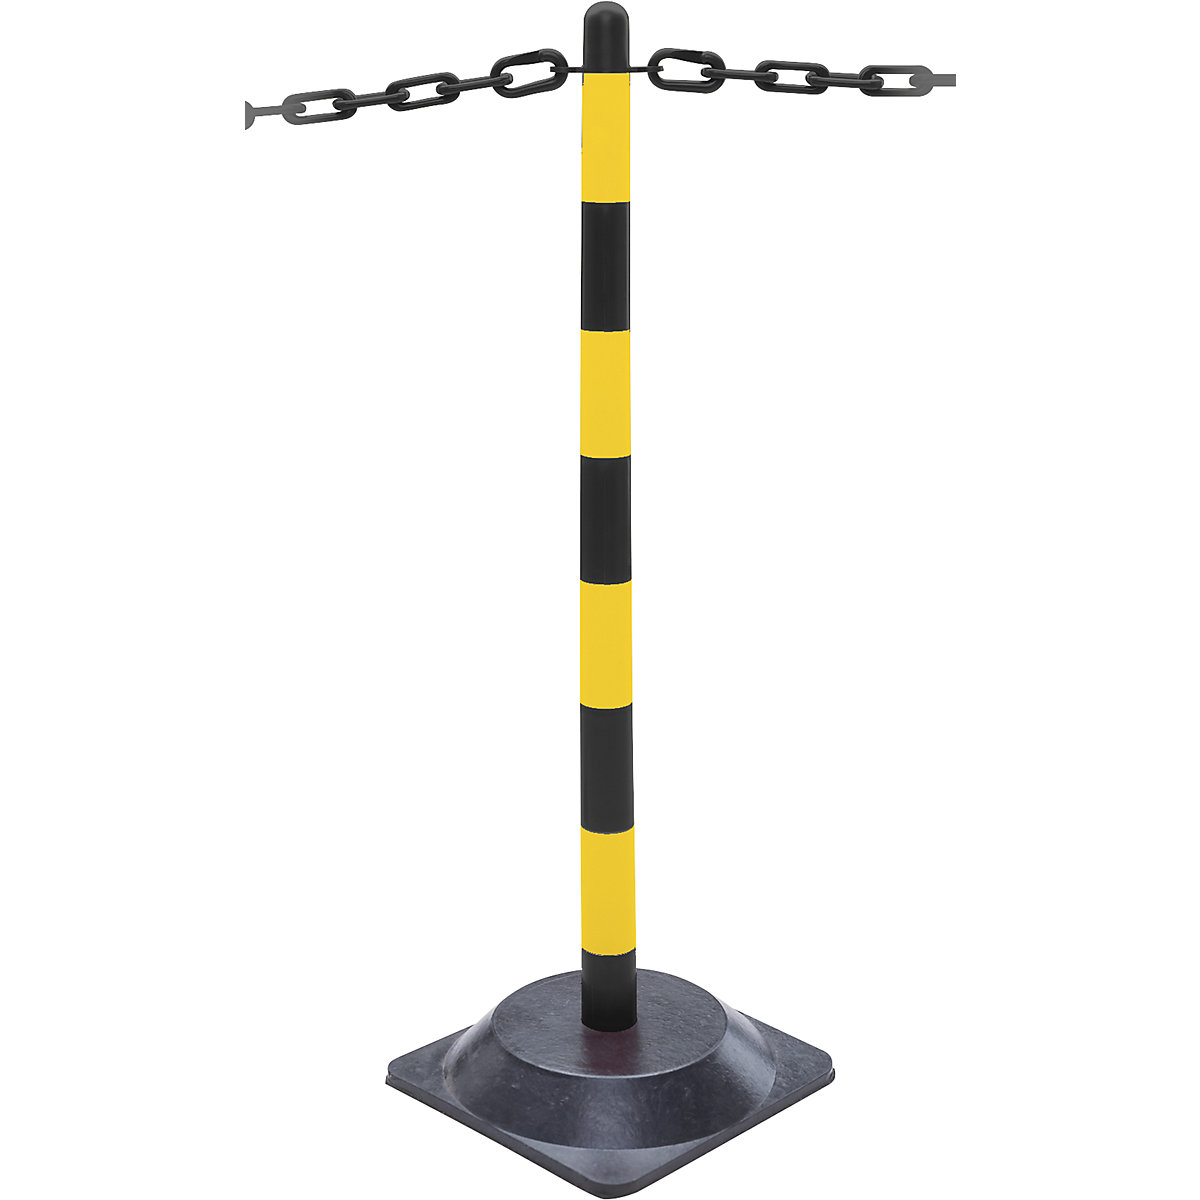 Chain stand set, square hard rubber foot, 6 posts, 10 m chain, black / yellow-6